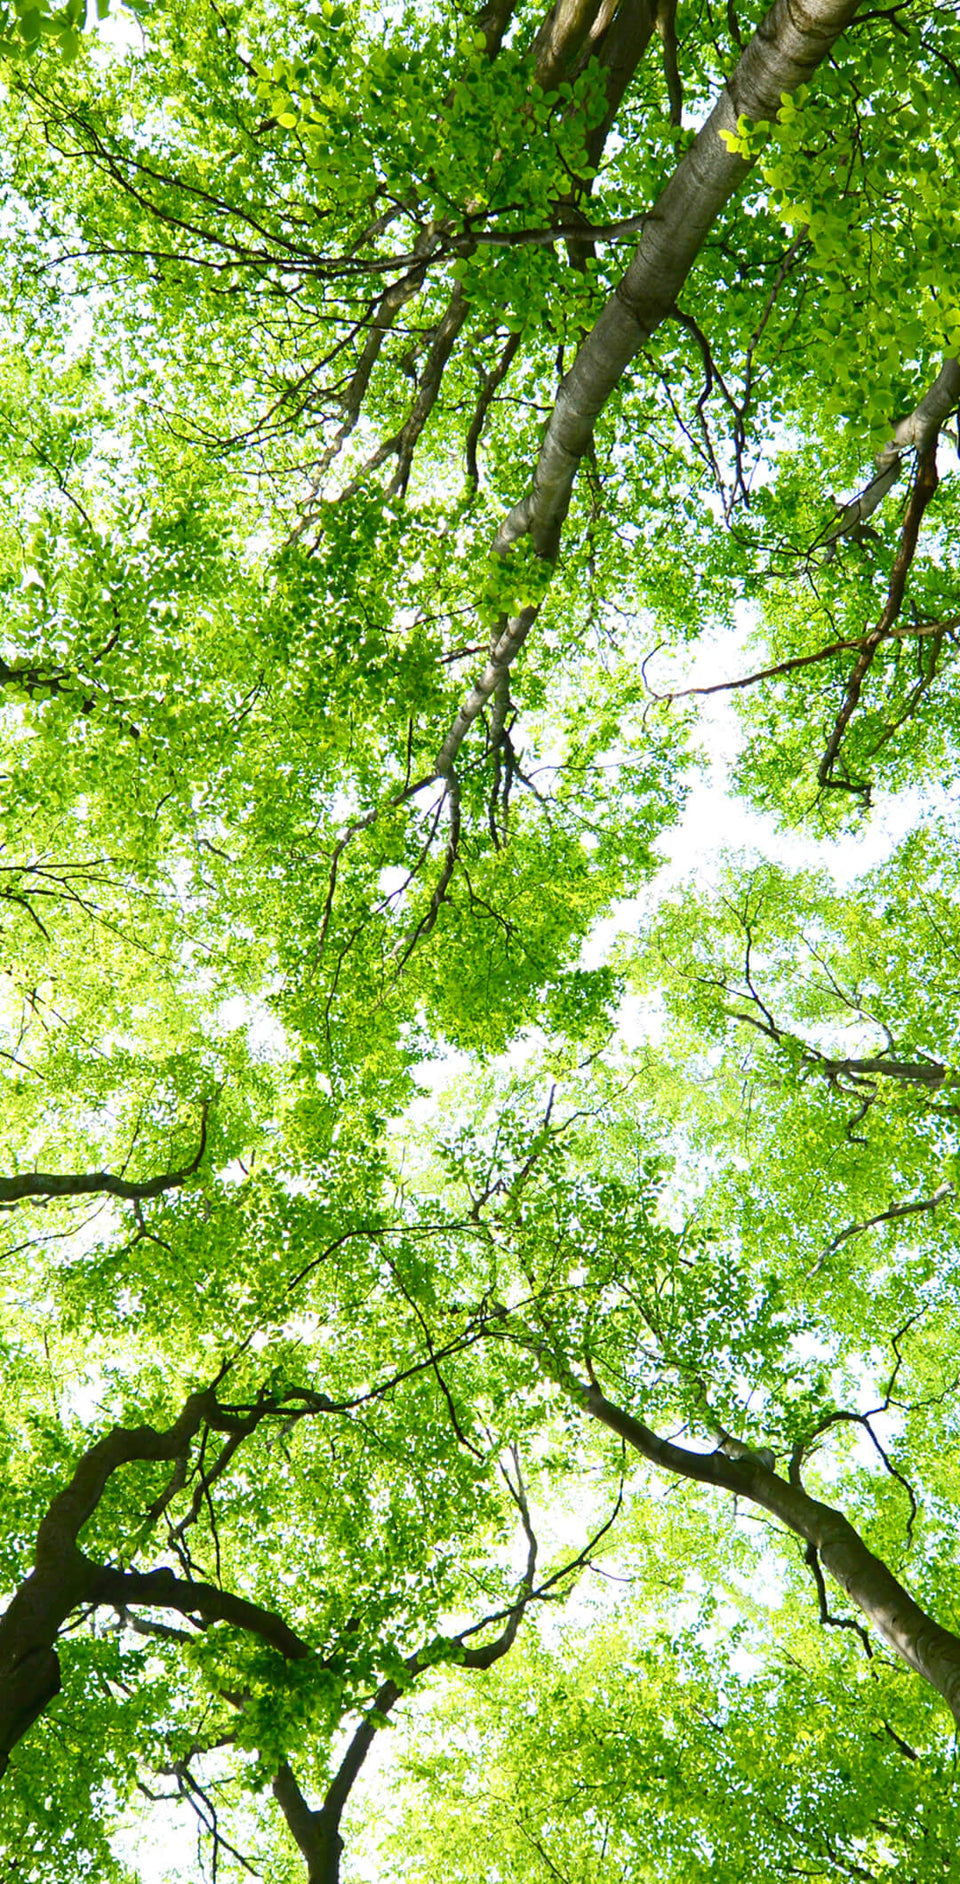 Looking up at a canopy of trees